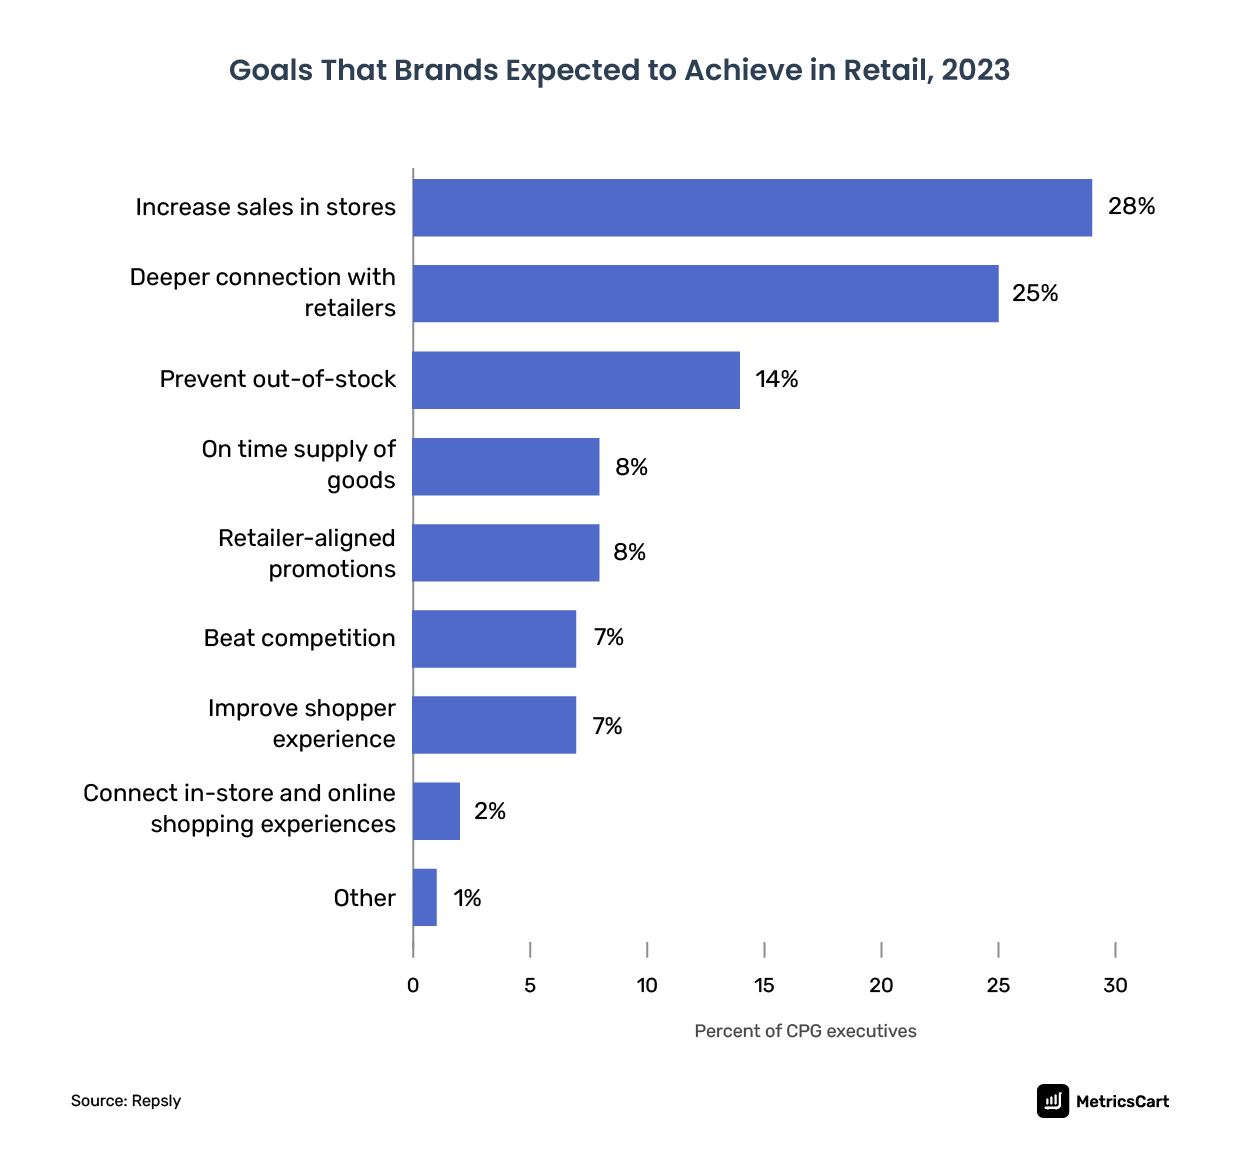 Chart showing Goals That Brands Expected to Achieve in Retail in 2023